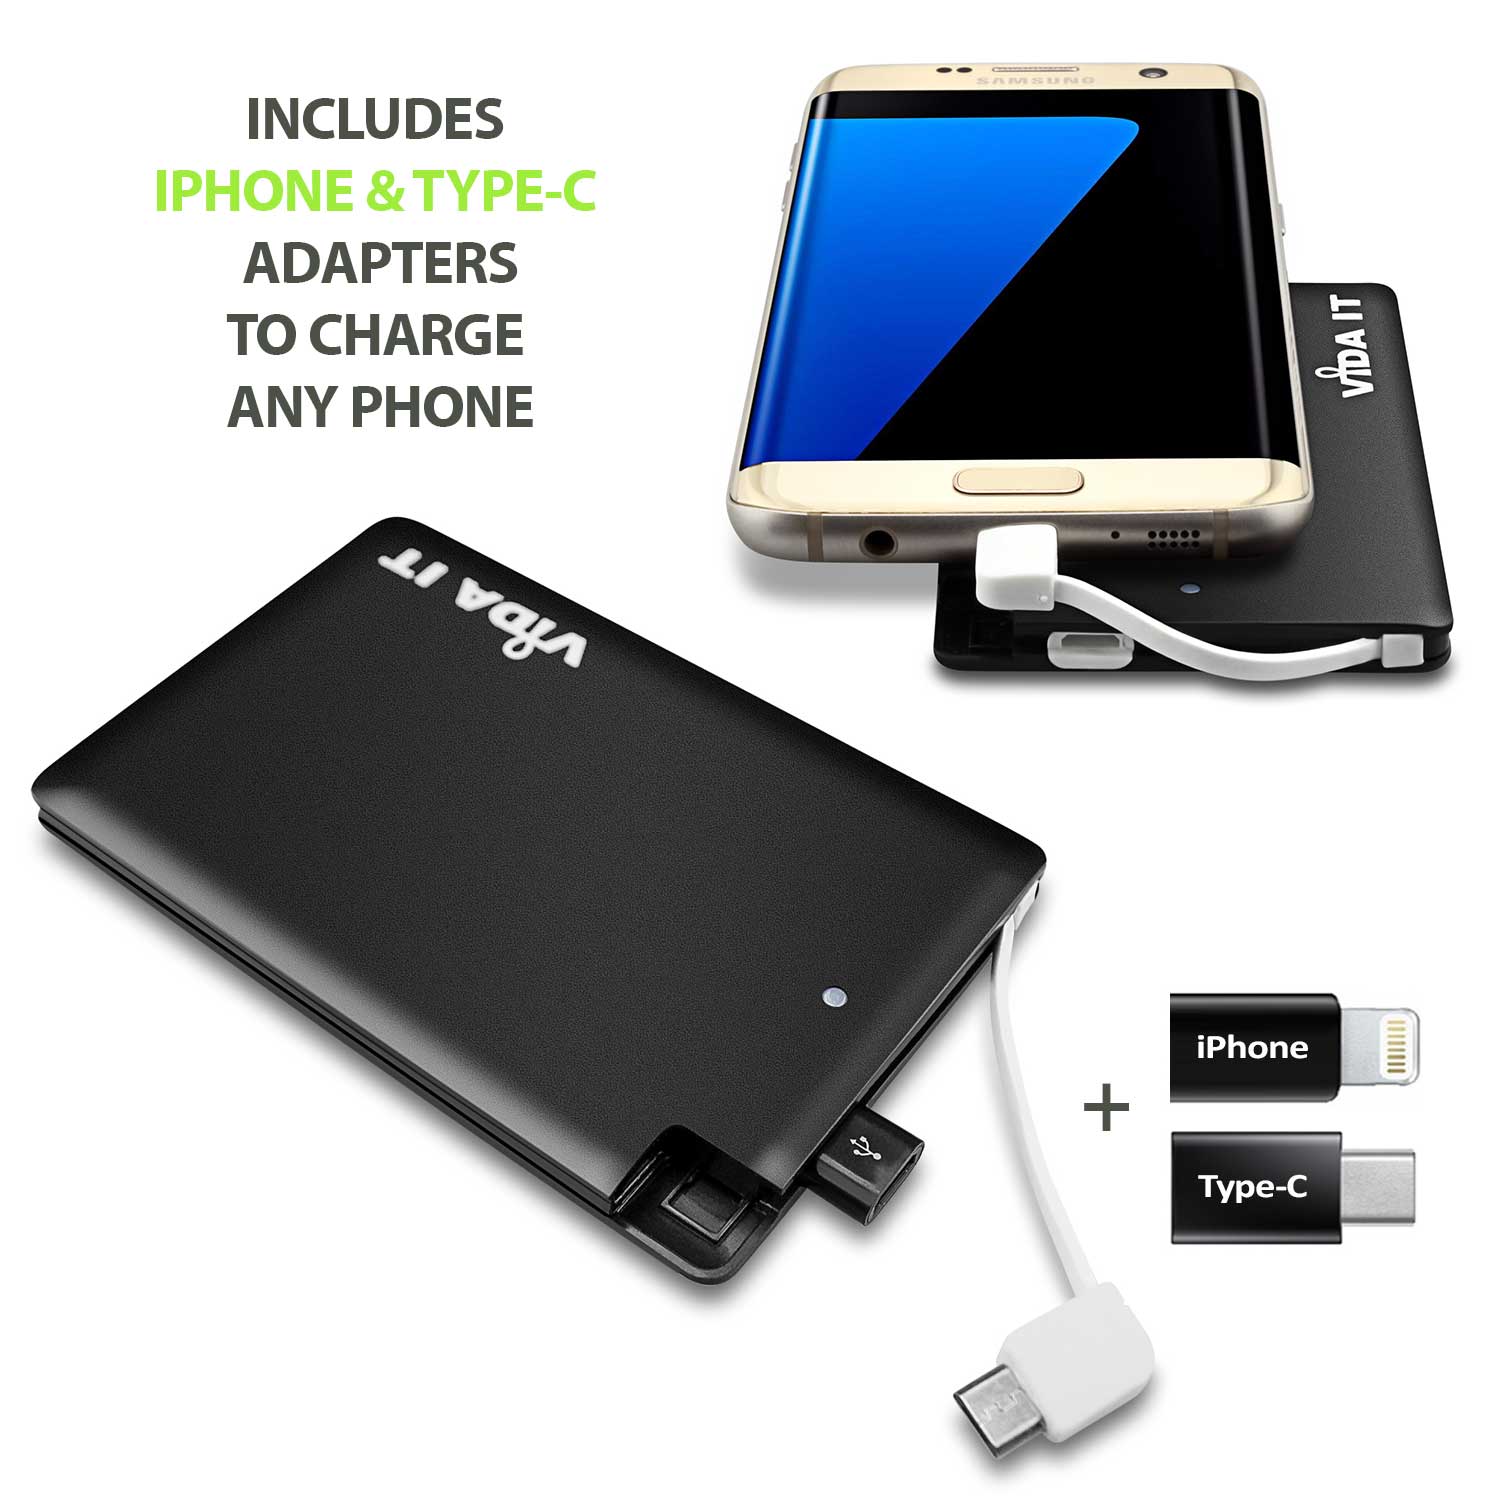 Slim credit card design Power Bank 2500mAh external battery pack thin portable USB charger with built-in micro-usb charging cable plus two adapters for iPhone Lightning and type-C usb-c connectors for mobile phone smartphone tablet pc